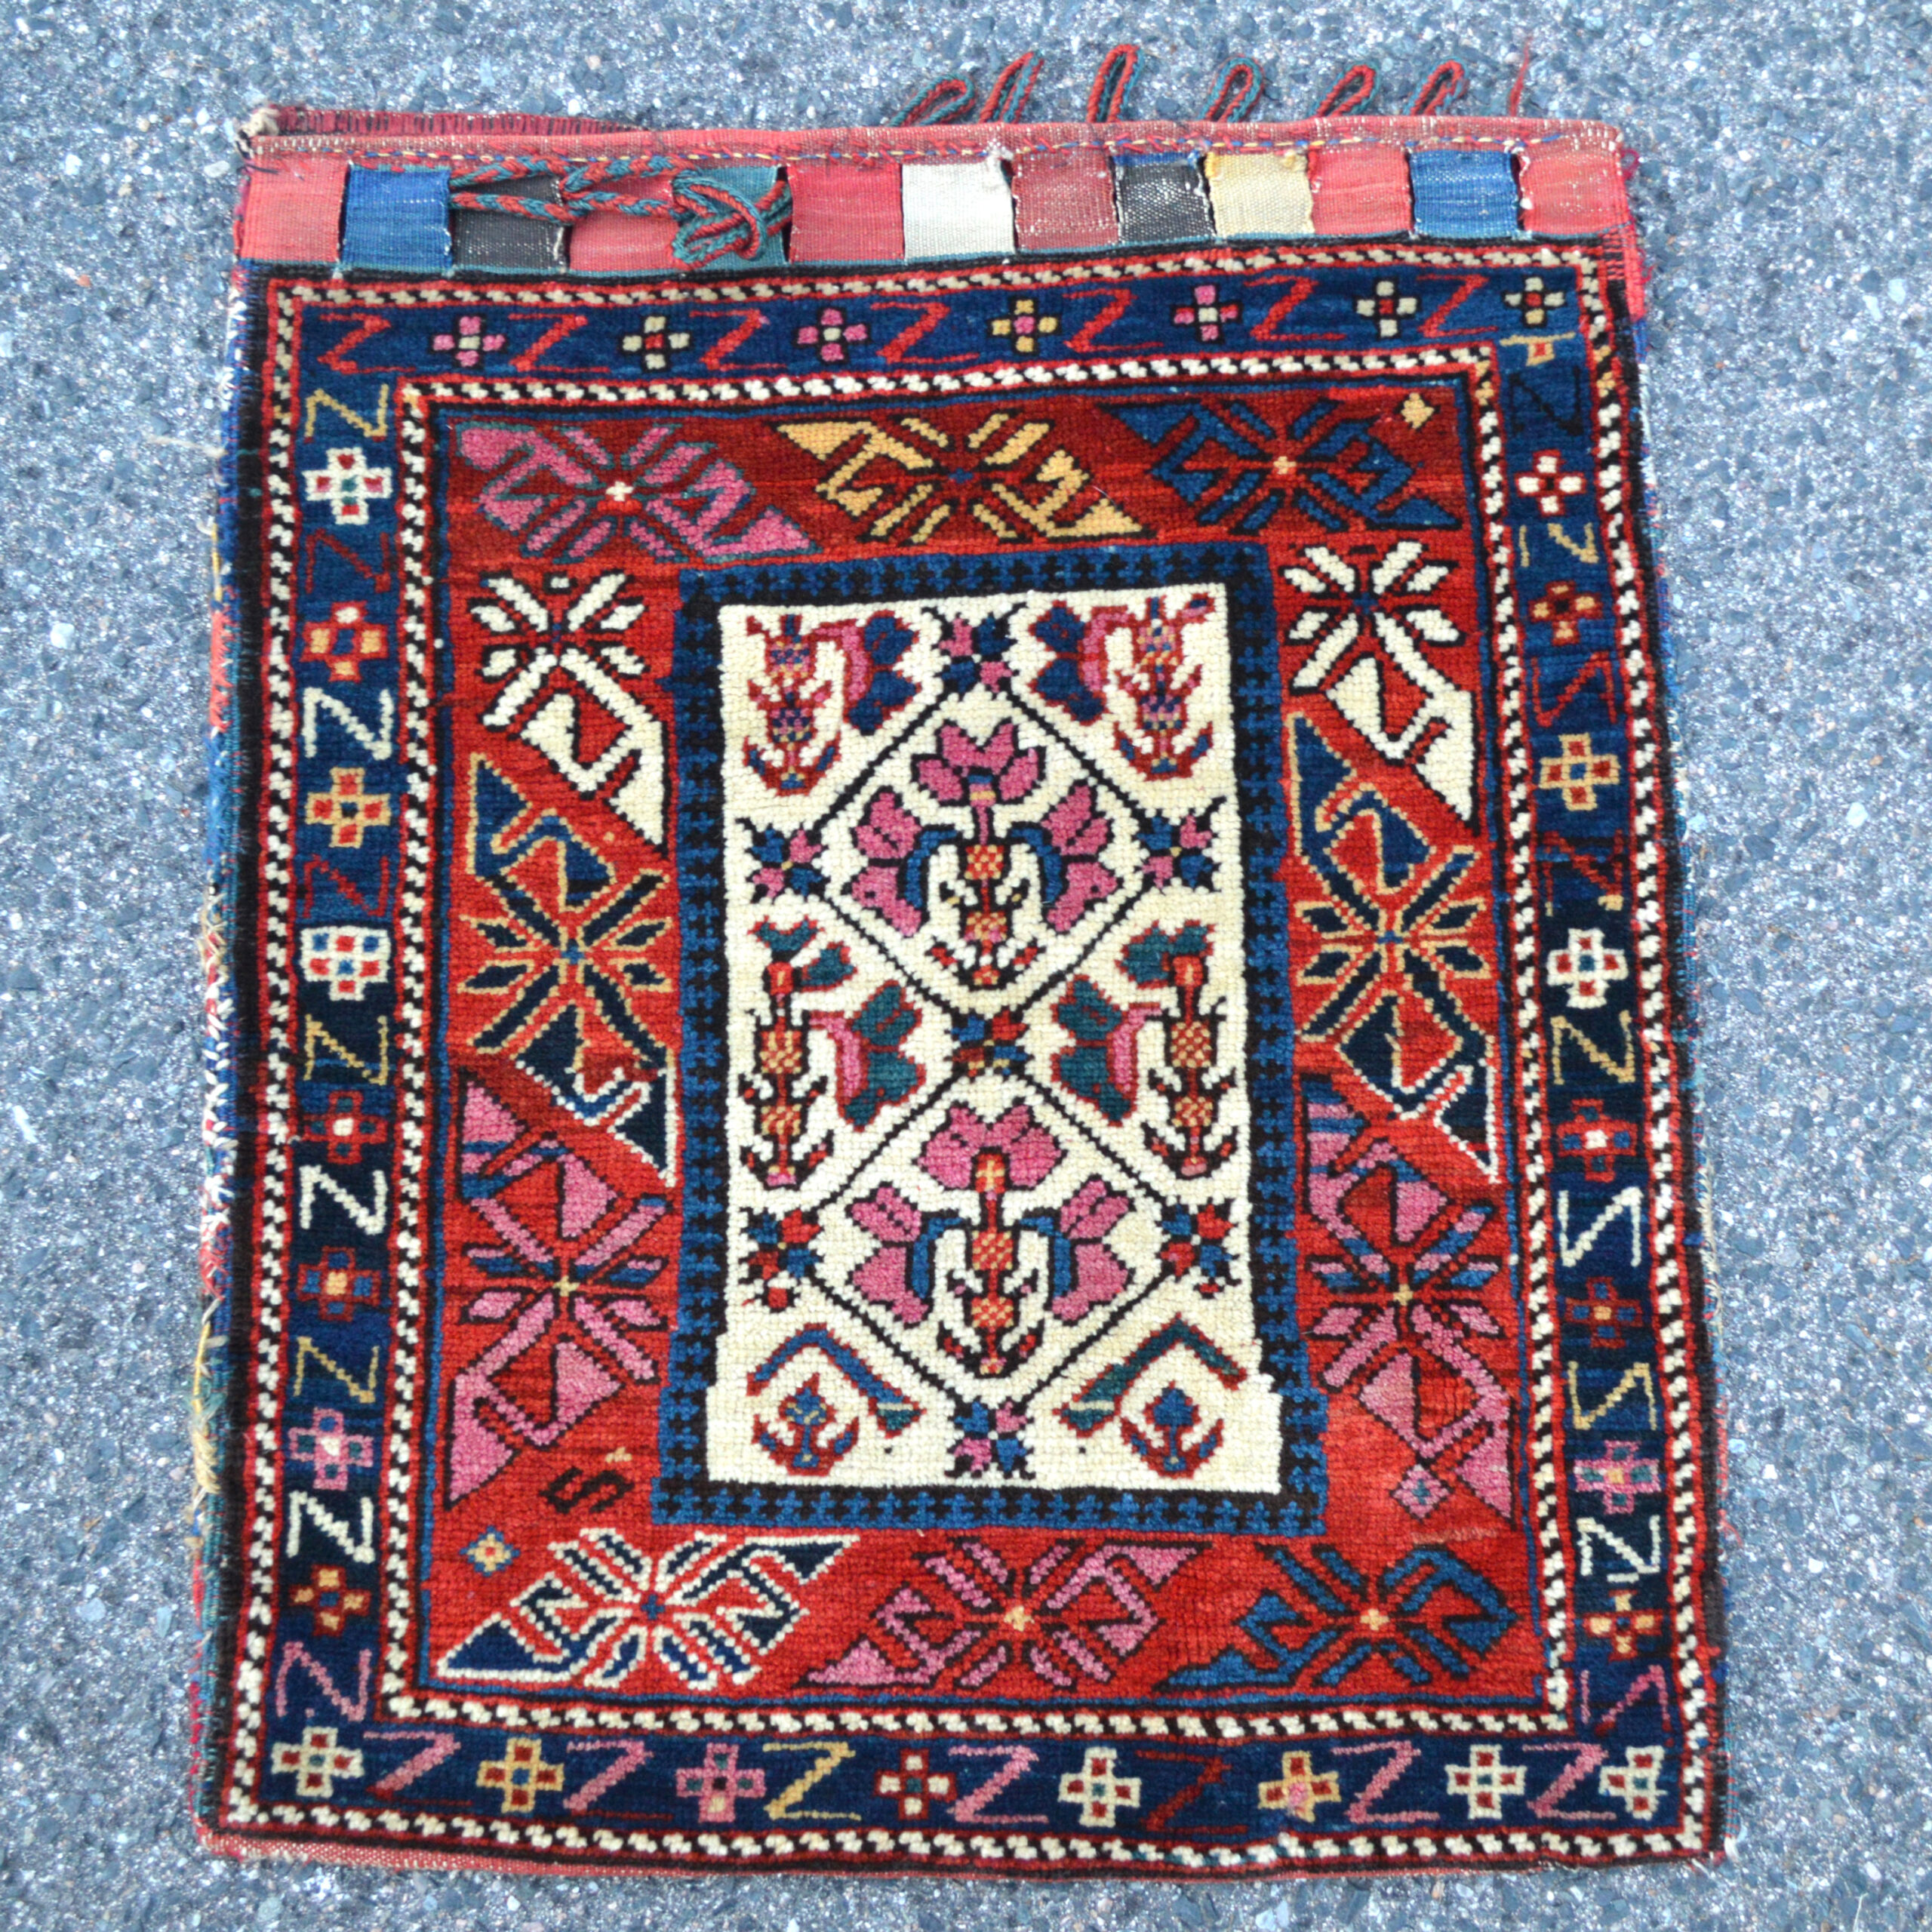 Douglas Stock Gallery, antique Persian and Caucasian tribal bags, antique bag faces - An antique south Caucasian bag with an ivory field that is decorated with stylized flowers using a cochineal dye. A red major border and navy border frame the field. This antique Caucasian bag retains its original closure tabs and beautiful, polychromatic striped kilim (flat woven) back - Antique rugs Boston,MA area New England, NYC, collector rugs and bags, antique rugs and bags for sophisticated collectors